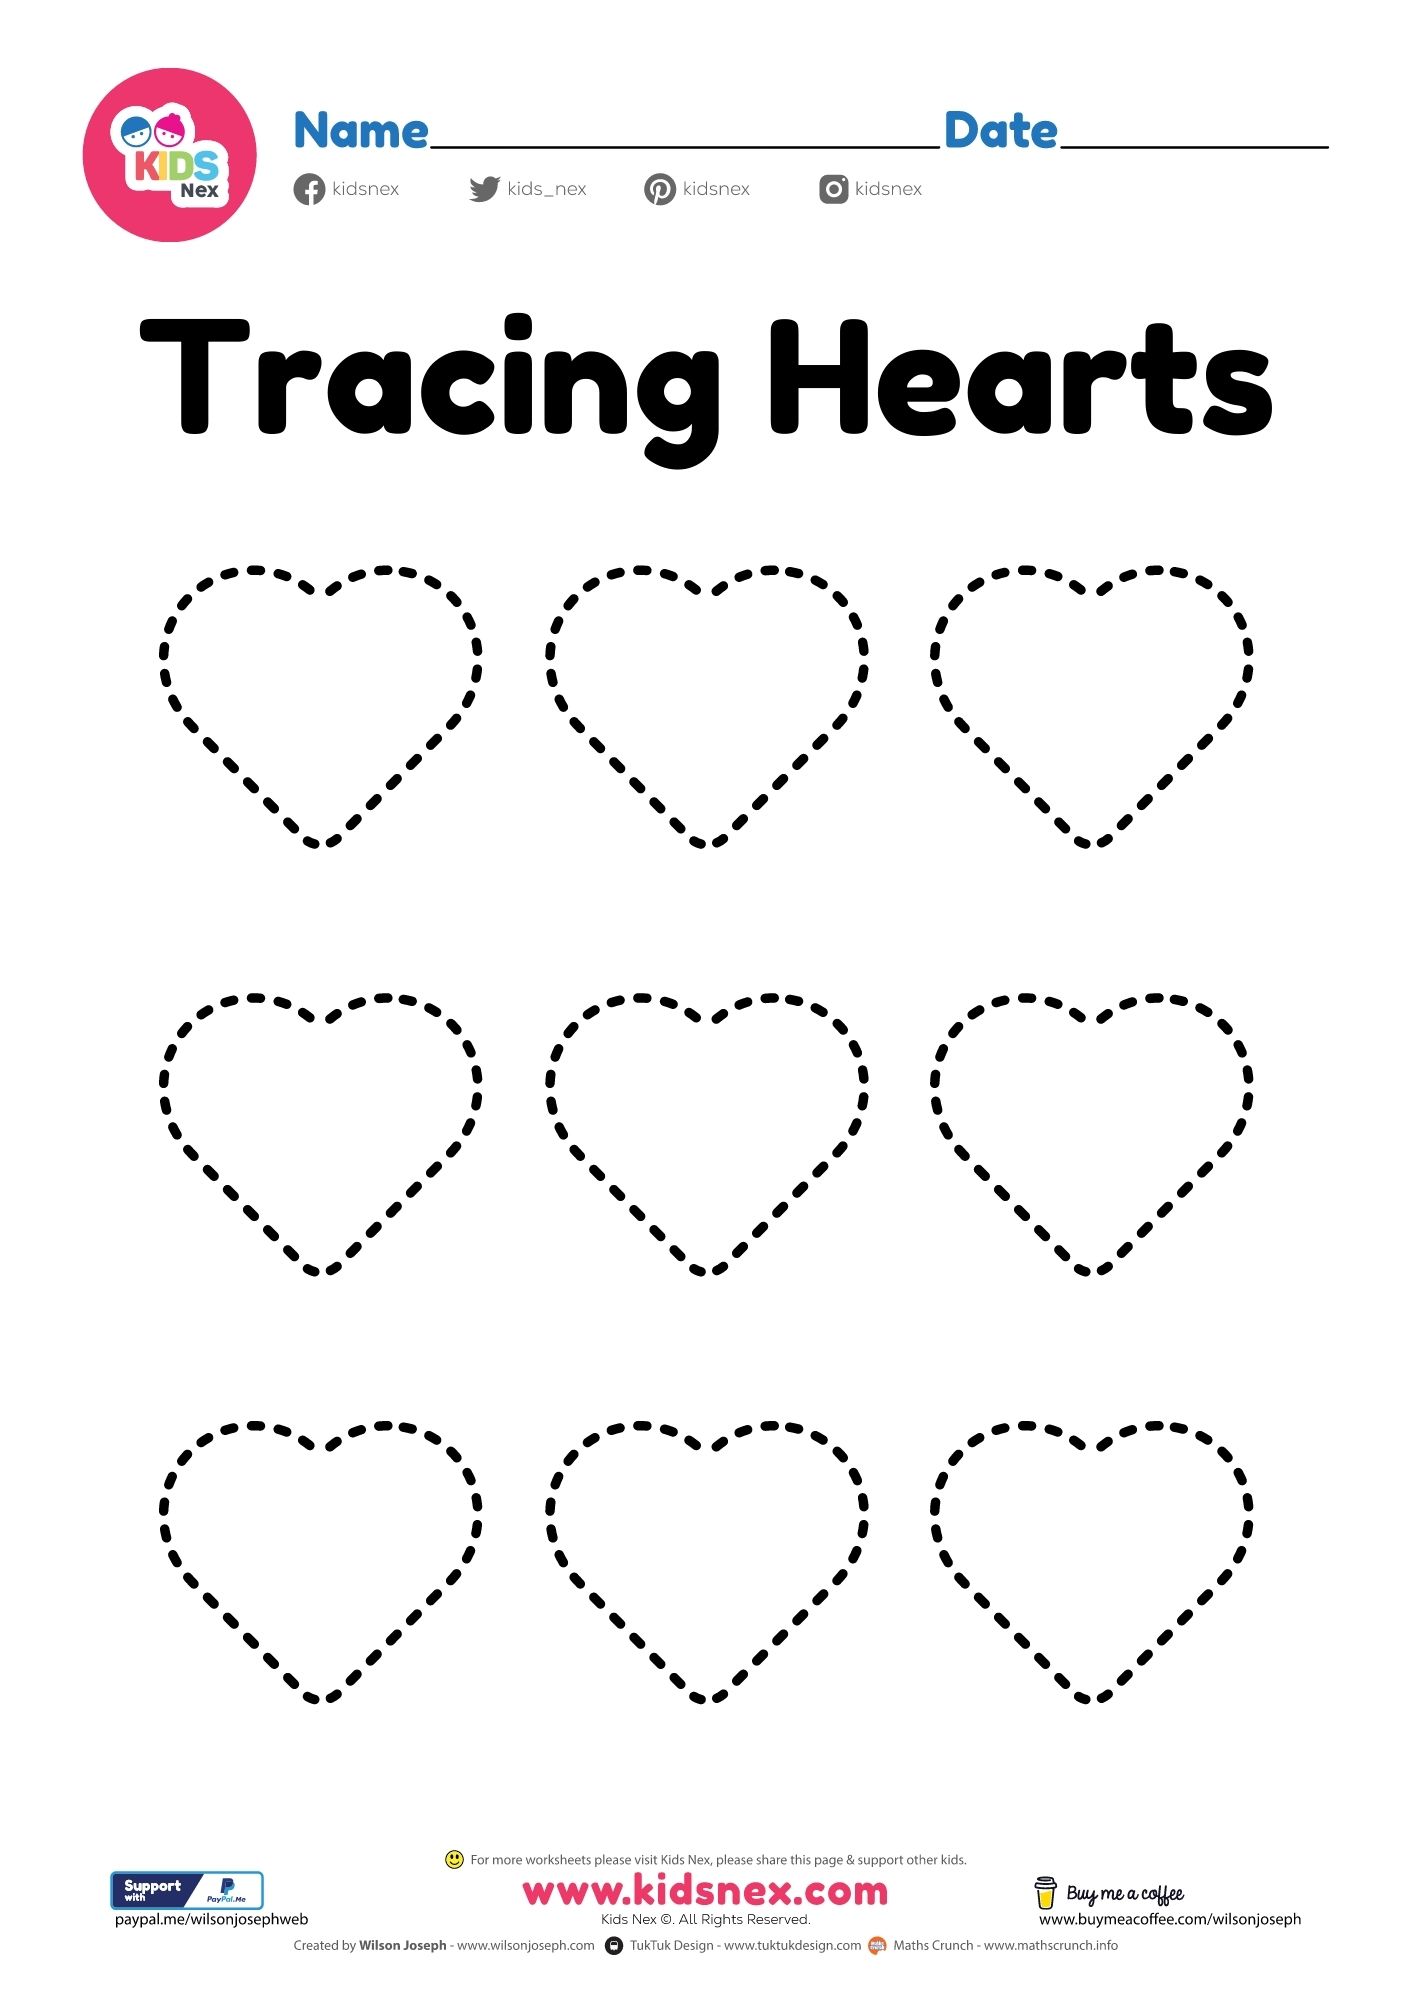 Tracing Hearts Worksheet Free Printable PDF for Kids